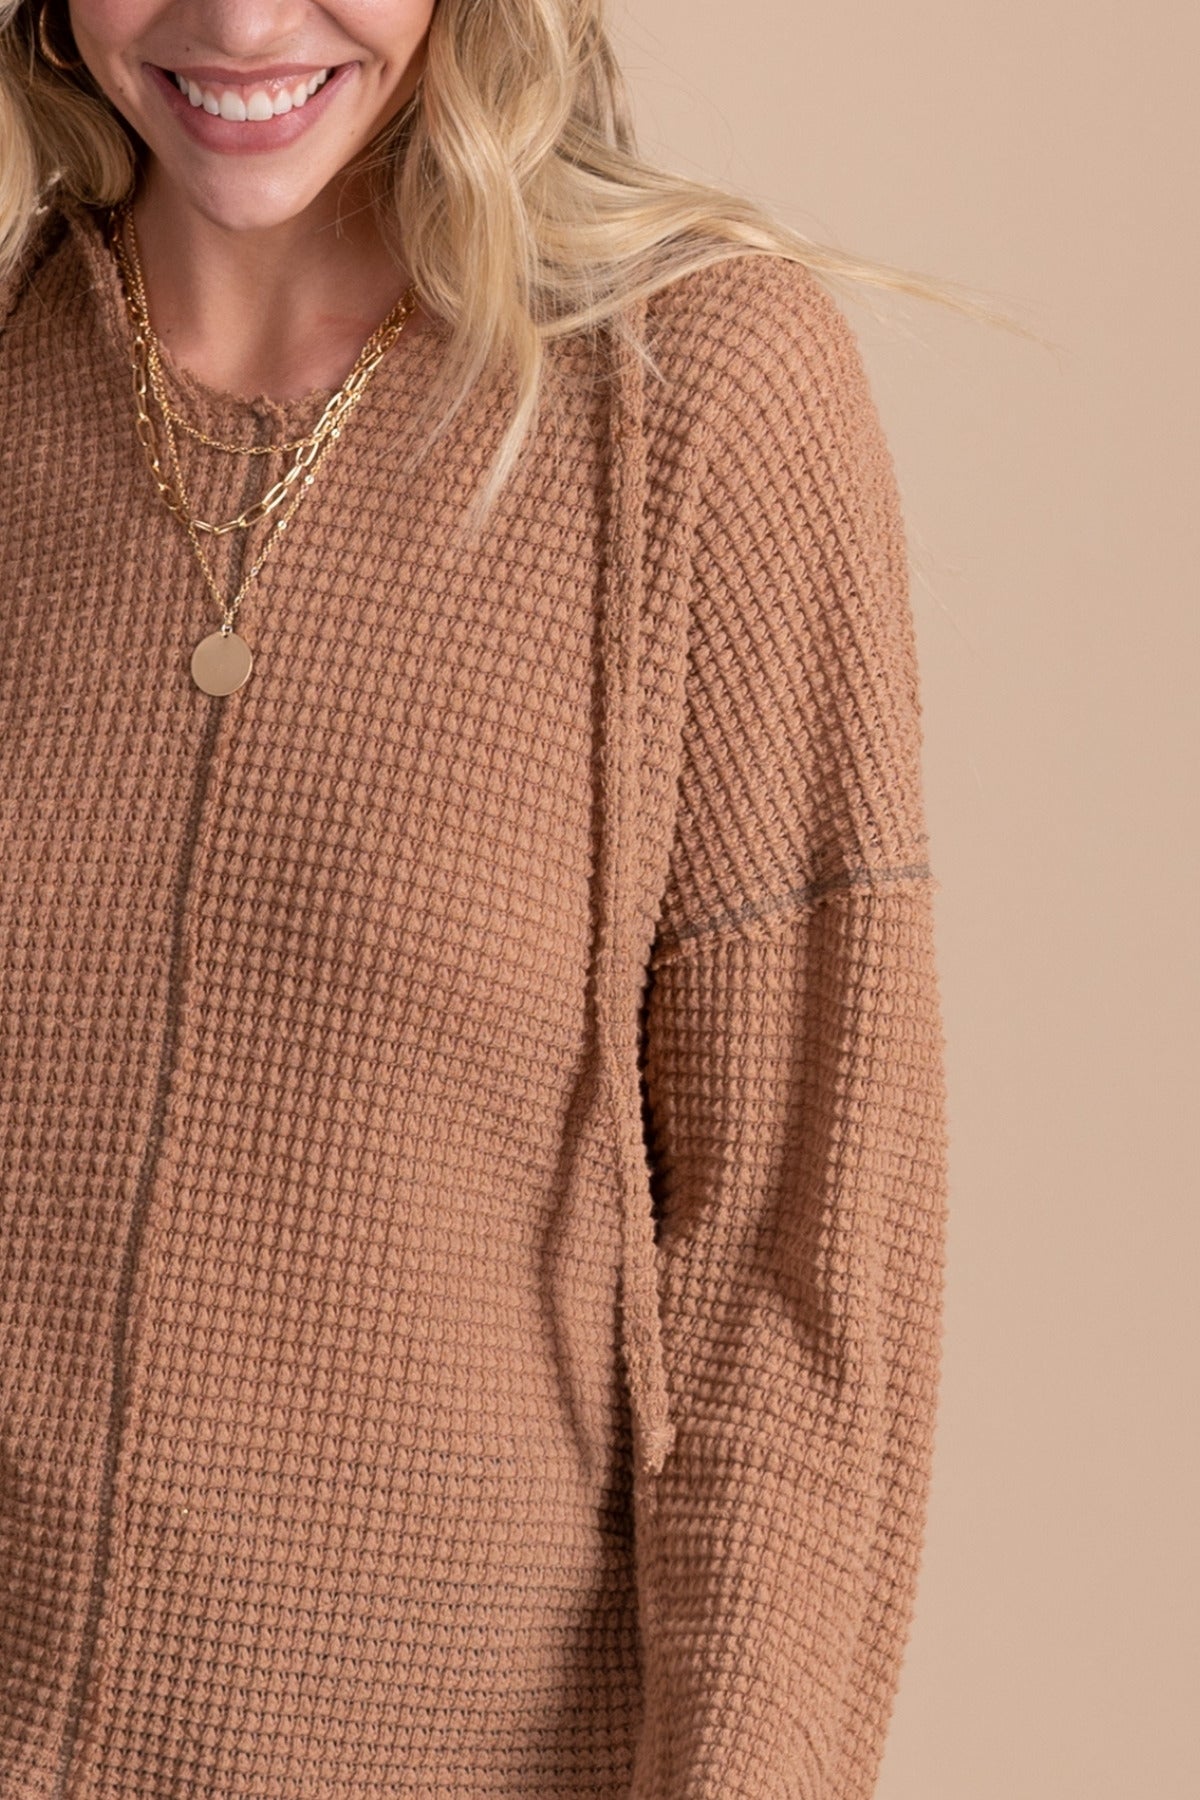 Knit Sweater with Hood in Camel Brown